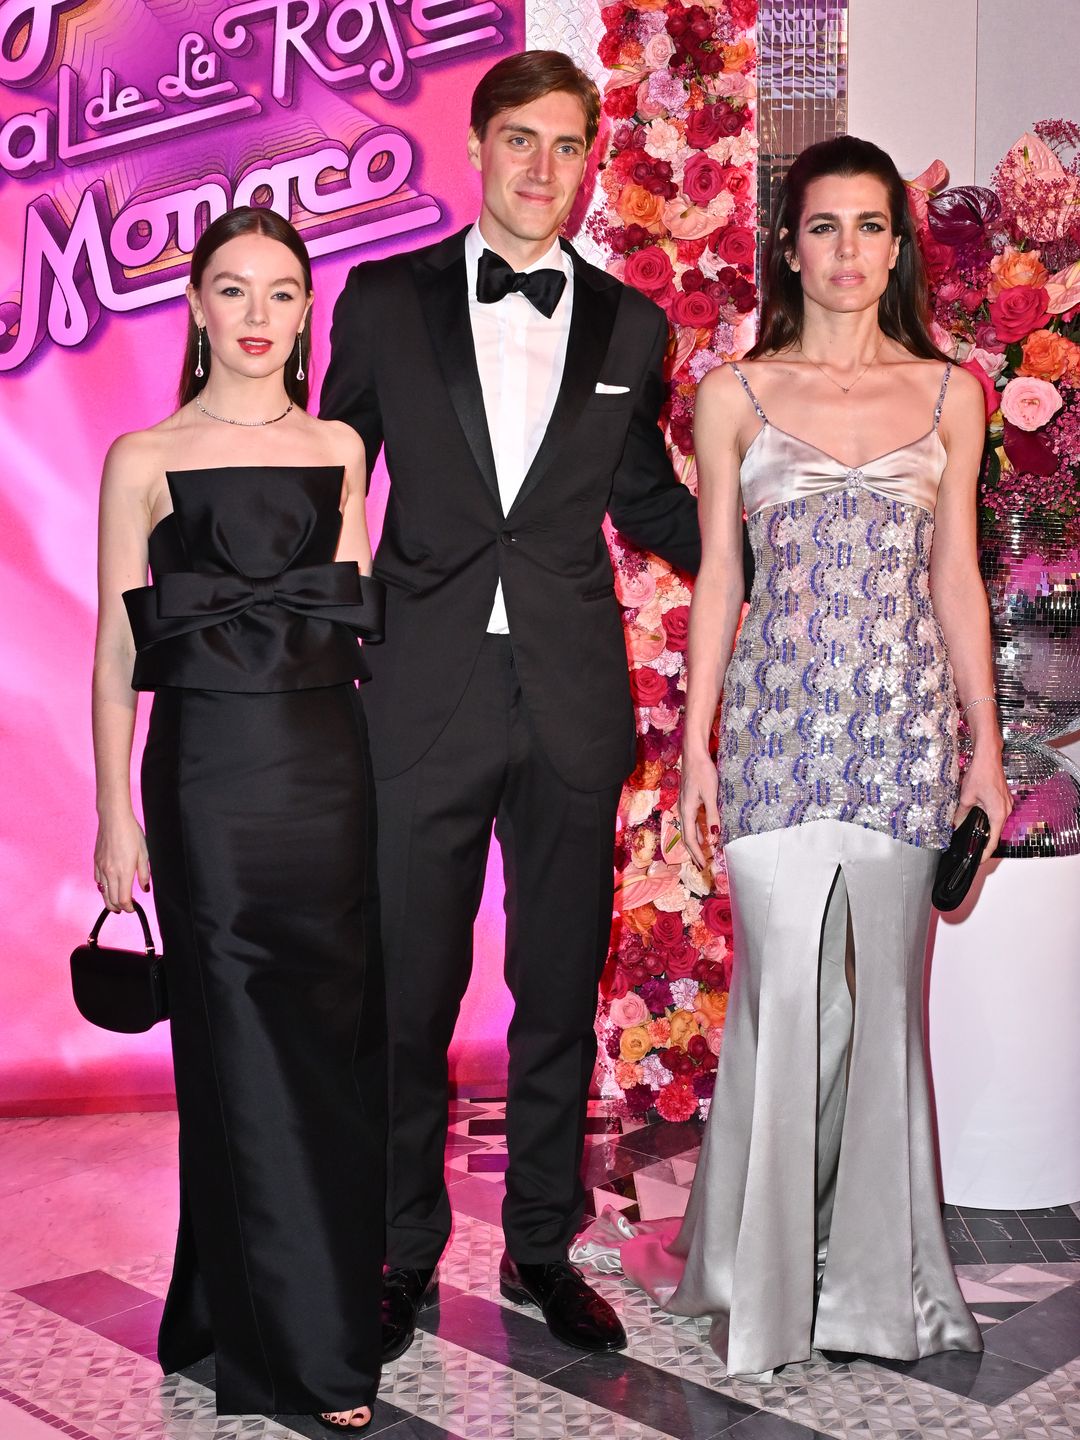 Princess Alexandra of Hanover poses with her boyfriend Ben Sylvester Strautmann and sister Charlotte Casiraghi 